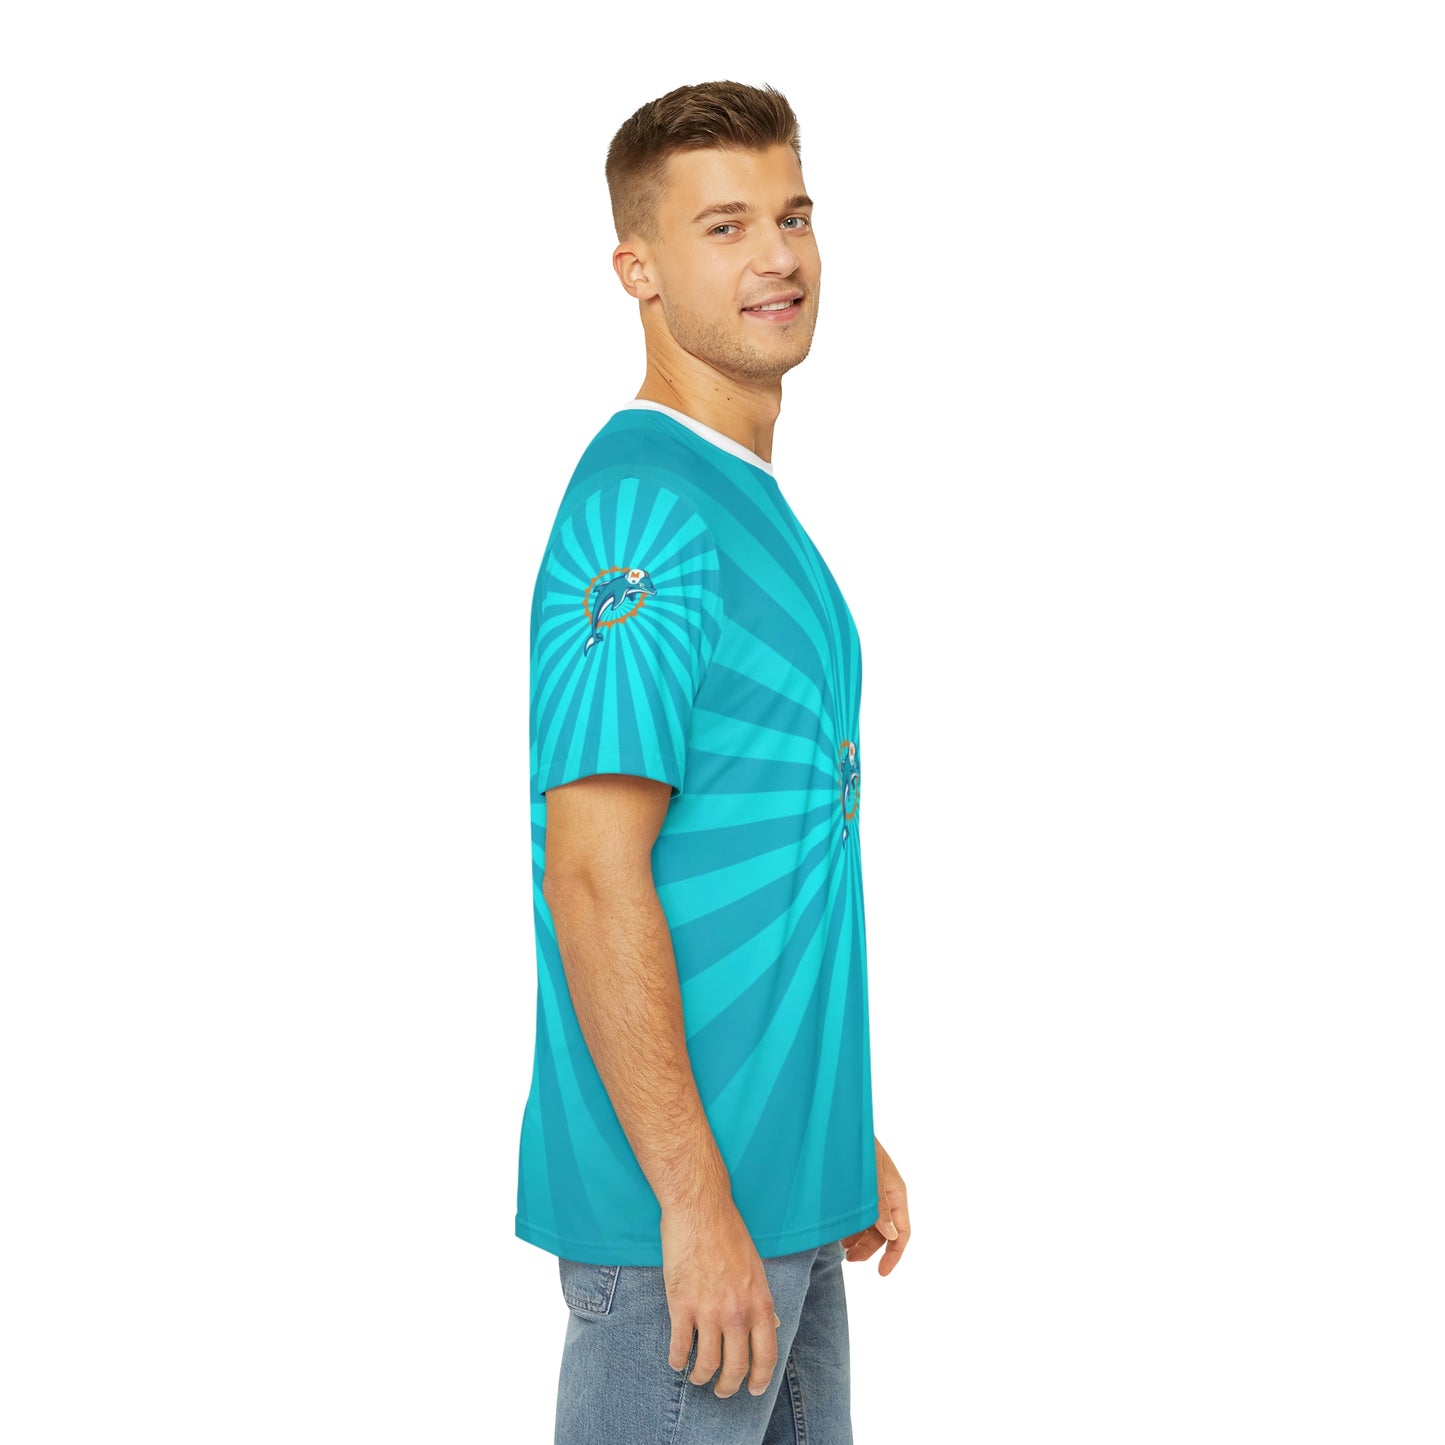 Geotrott NFL Miami Dolphins Men's Polyester All Over Print Tee T-Shirt